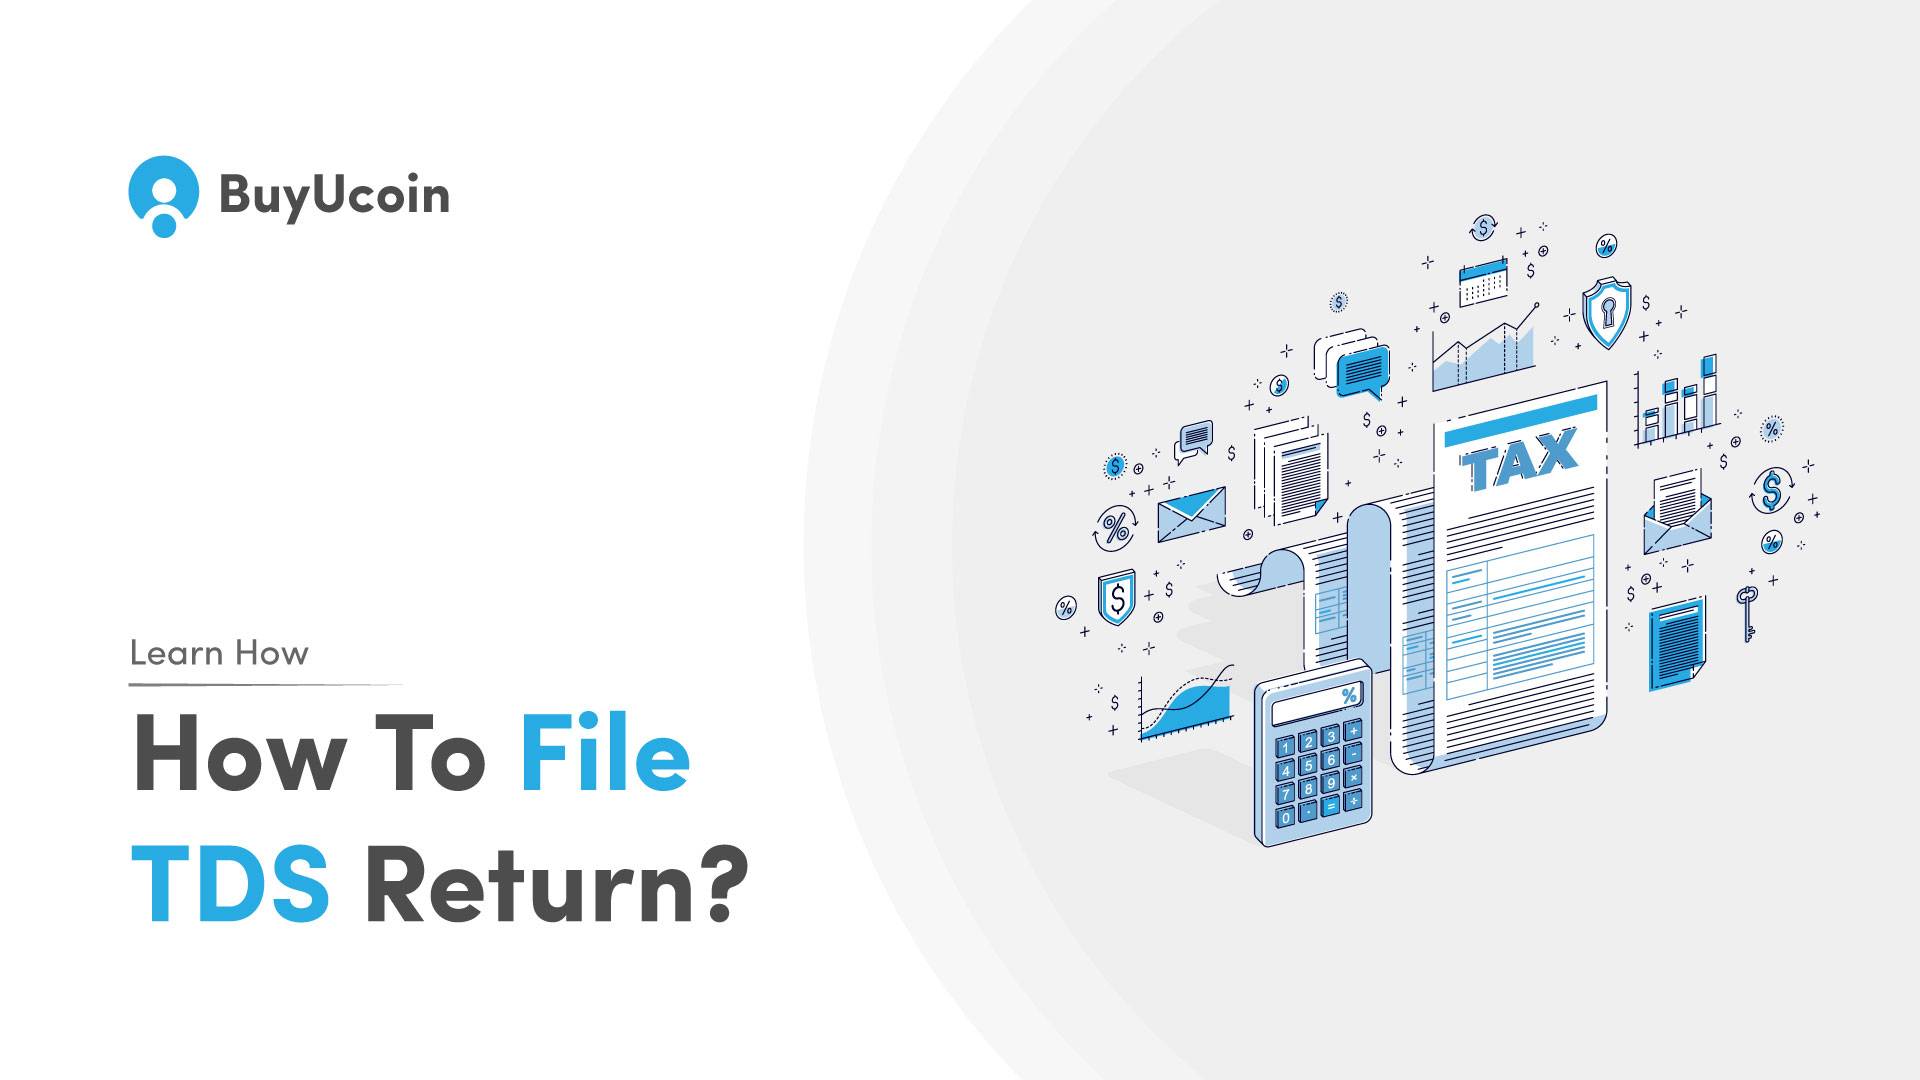 How To File TDS Return